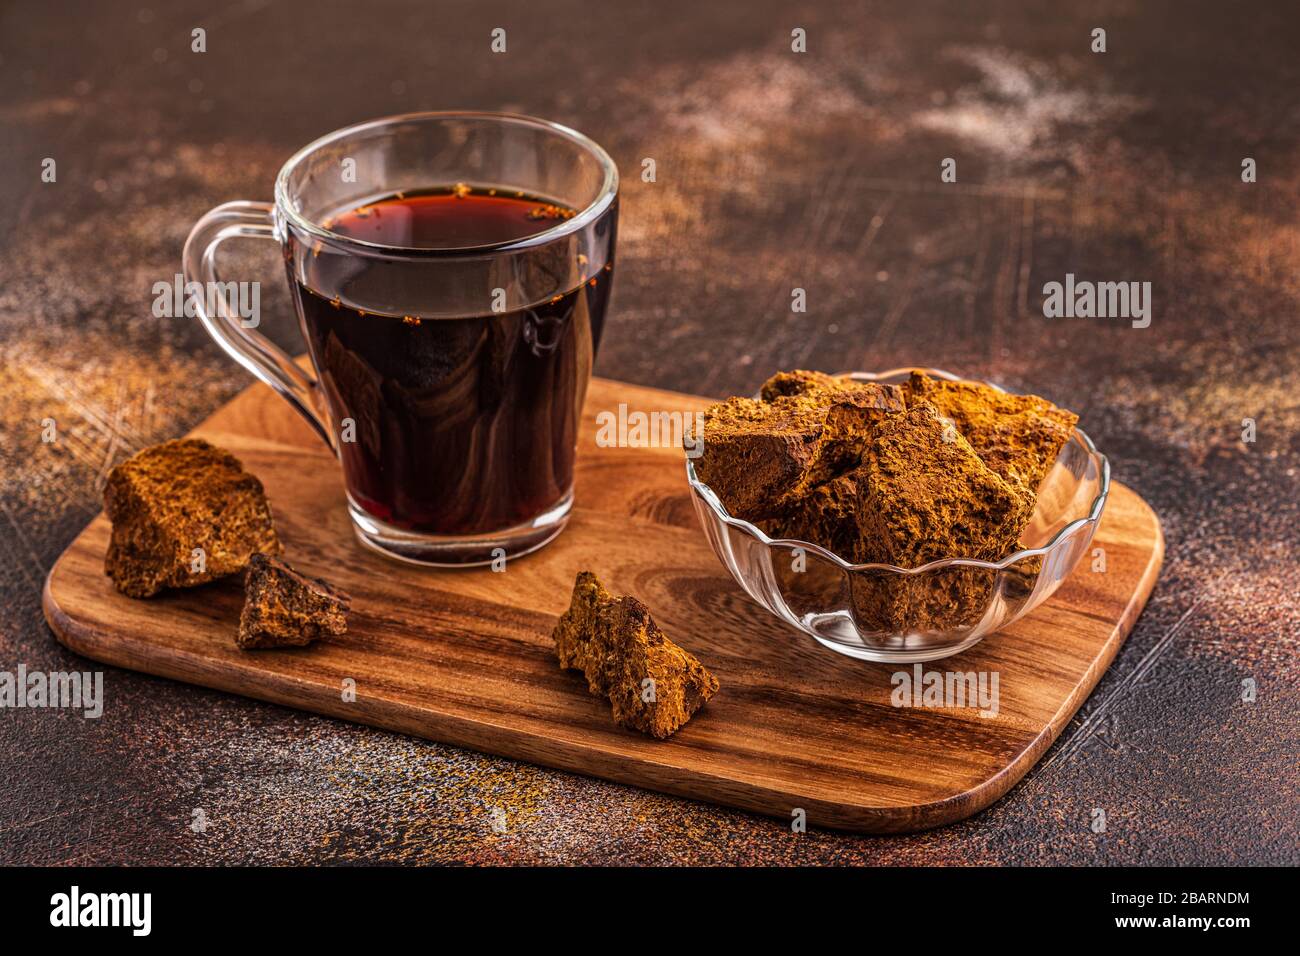 Chaga tea - a strong antioxidant, boosts immune system, has detox quality, improves digestive. Stock Photo